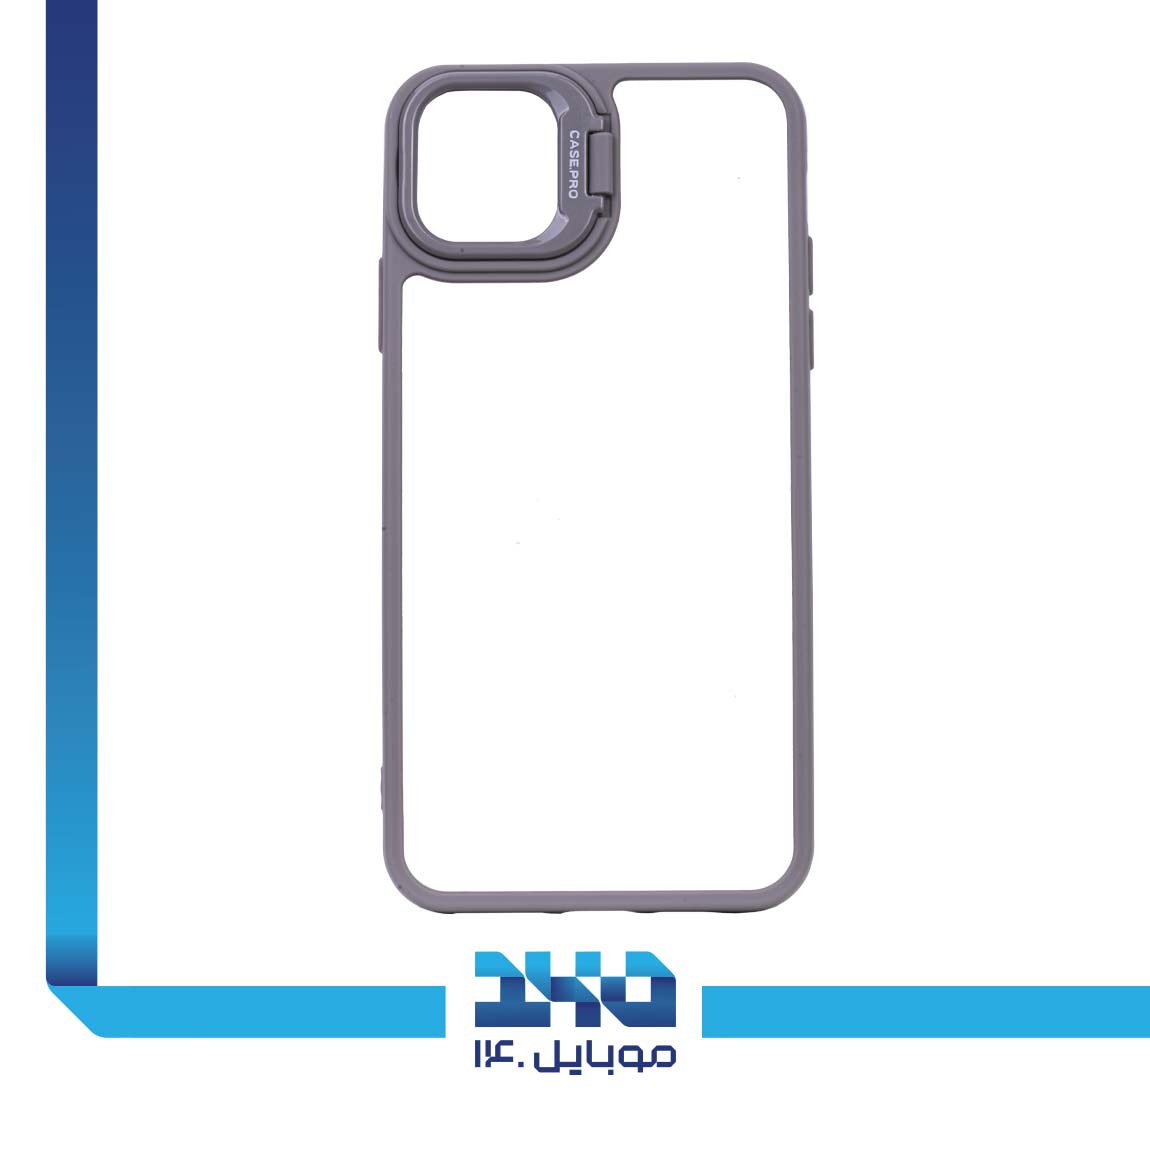  Holder Case For iPhone 11 Pro Max 2